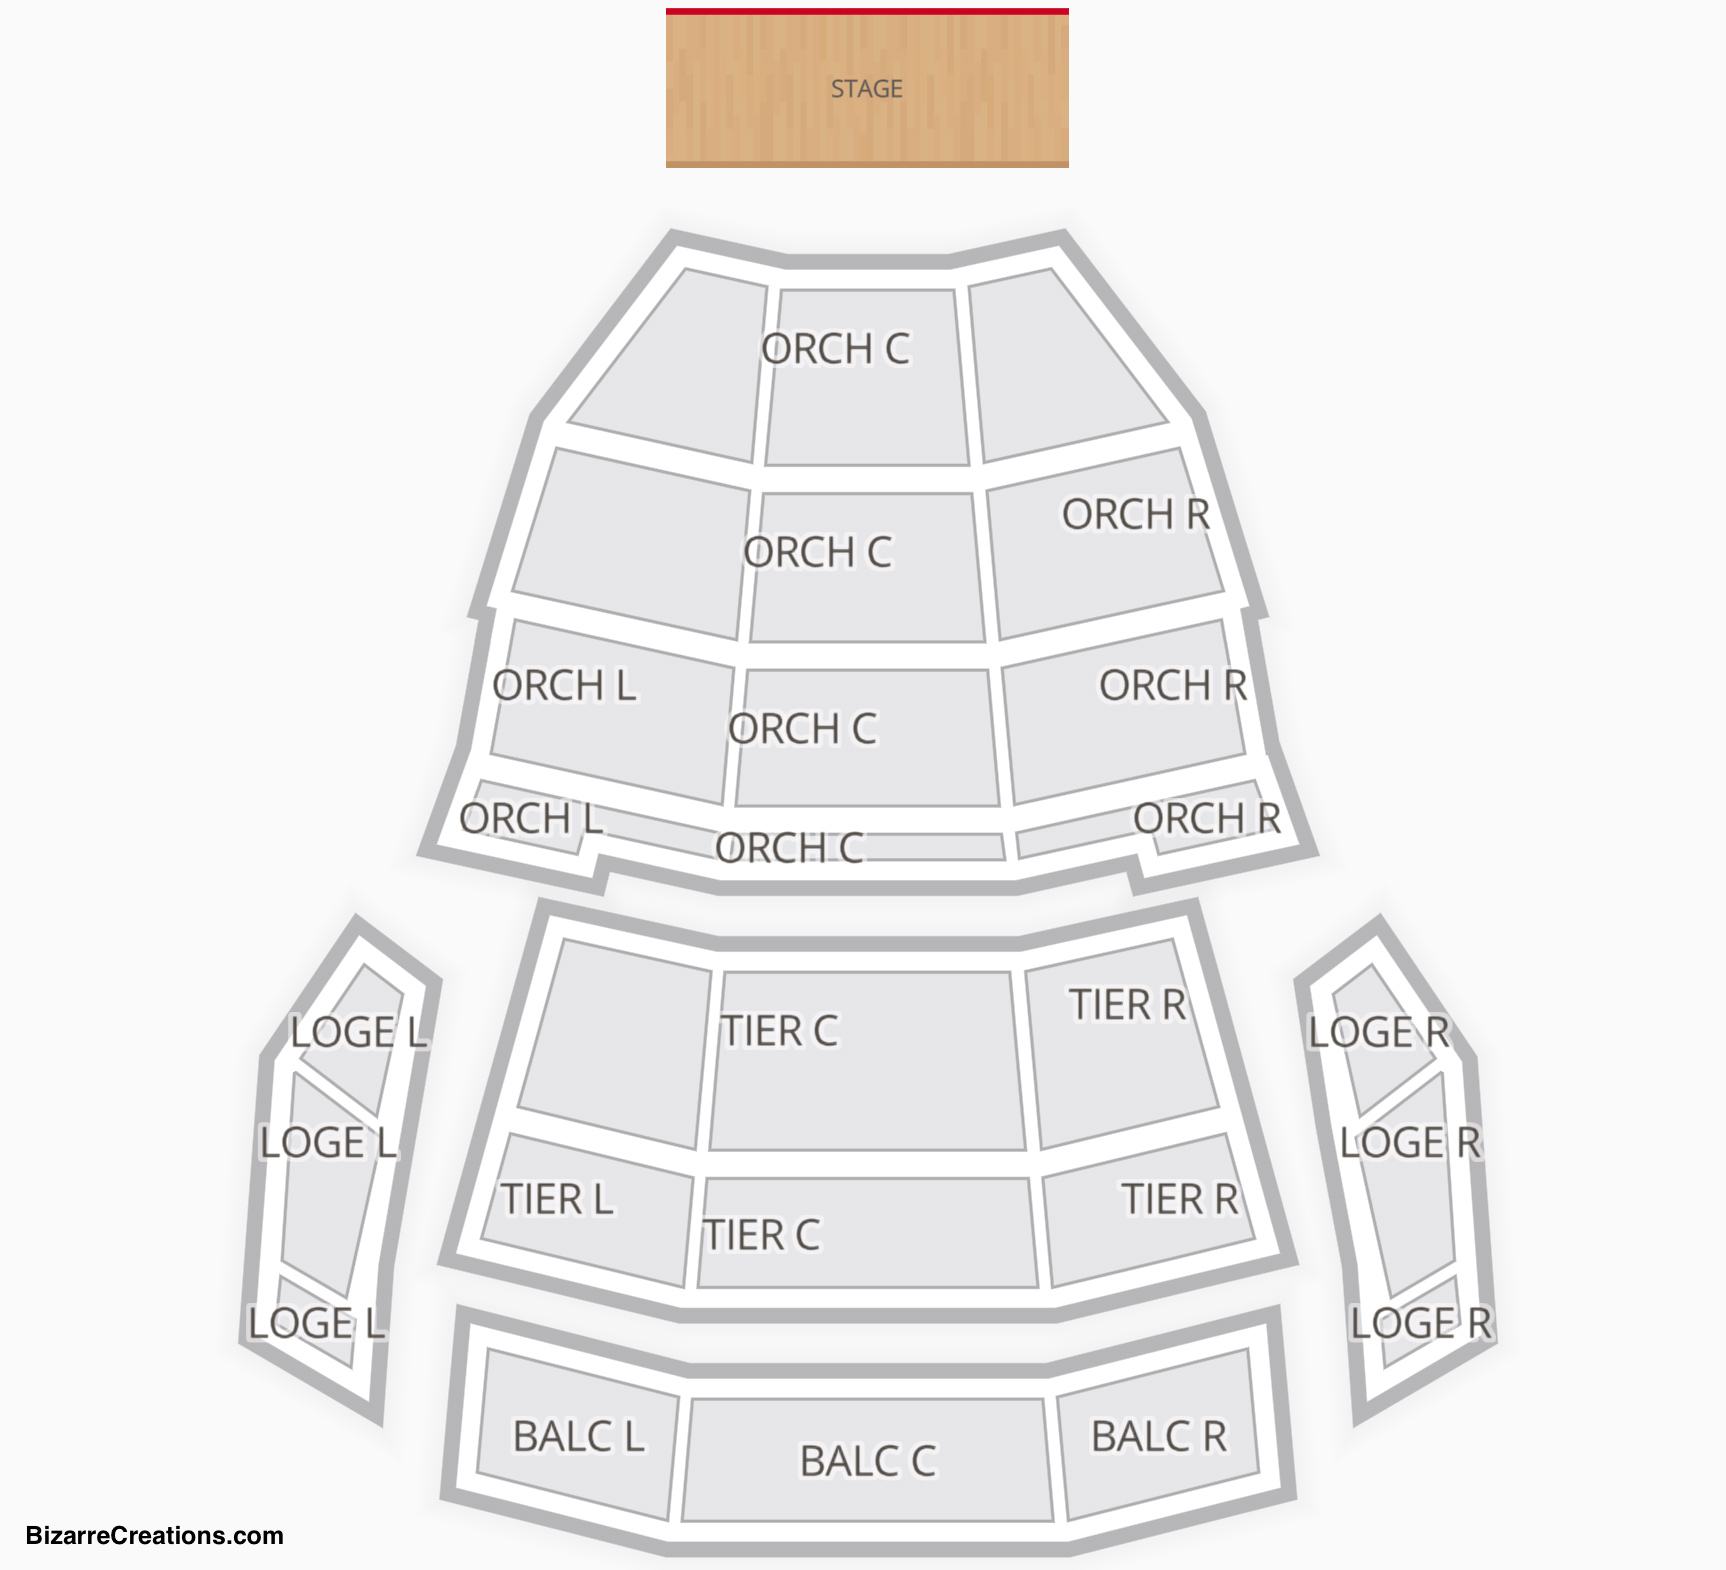 Safe Performing Arts Center Seating Chart